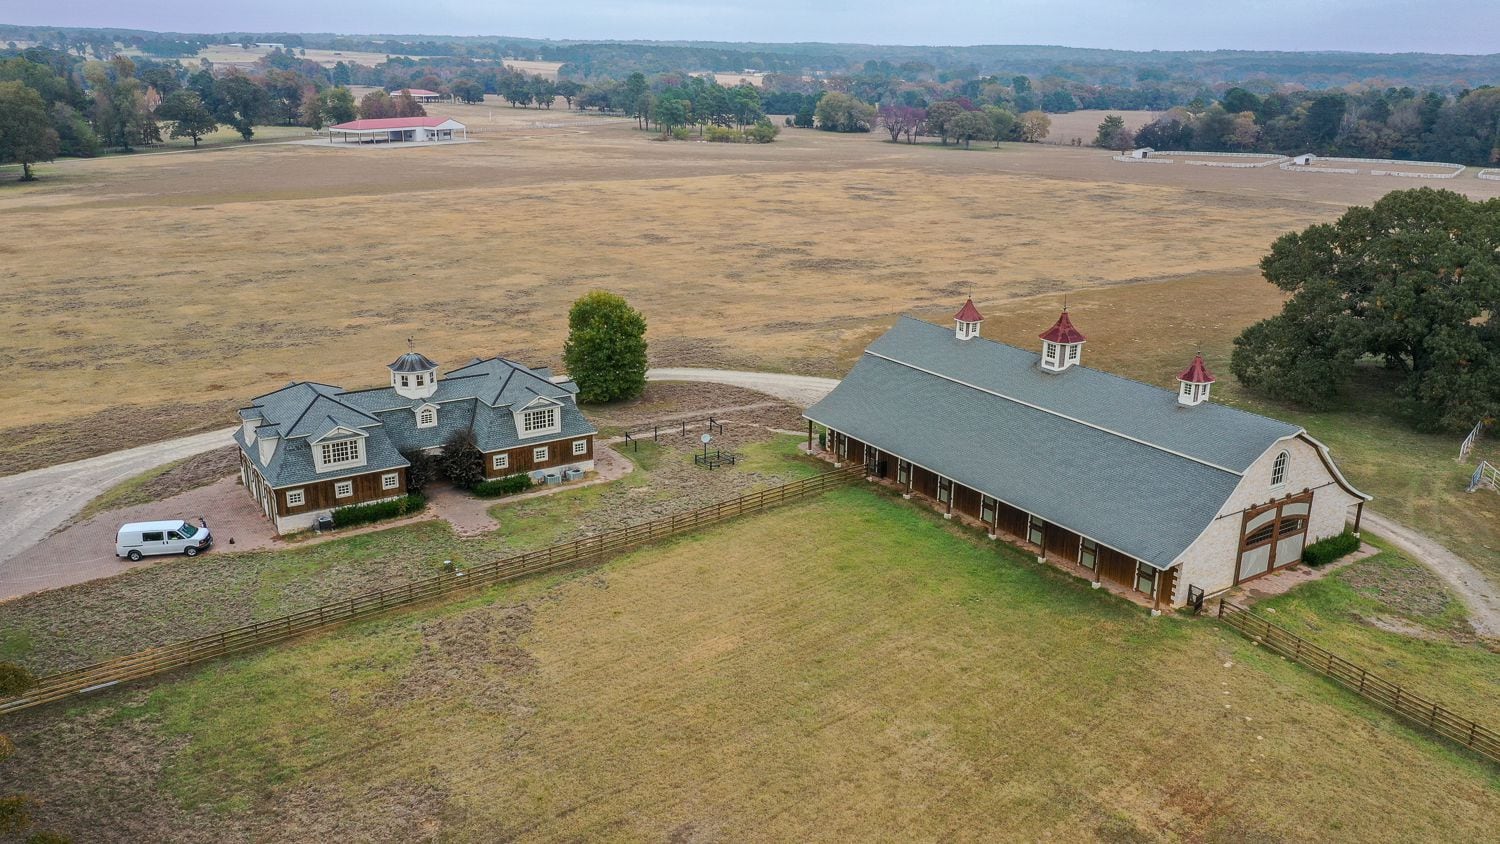 There are several garages and barns on the ranch.